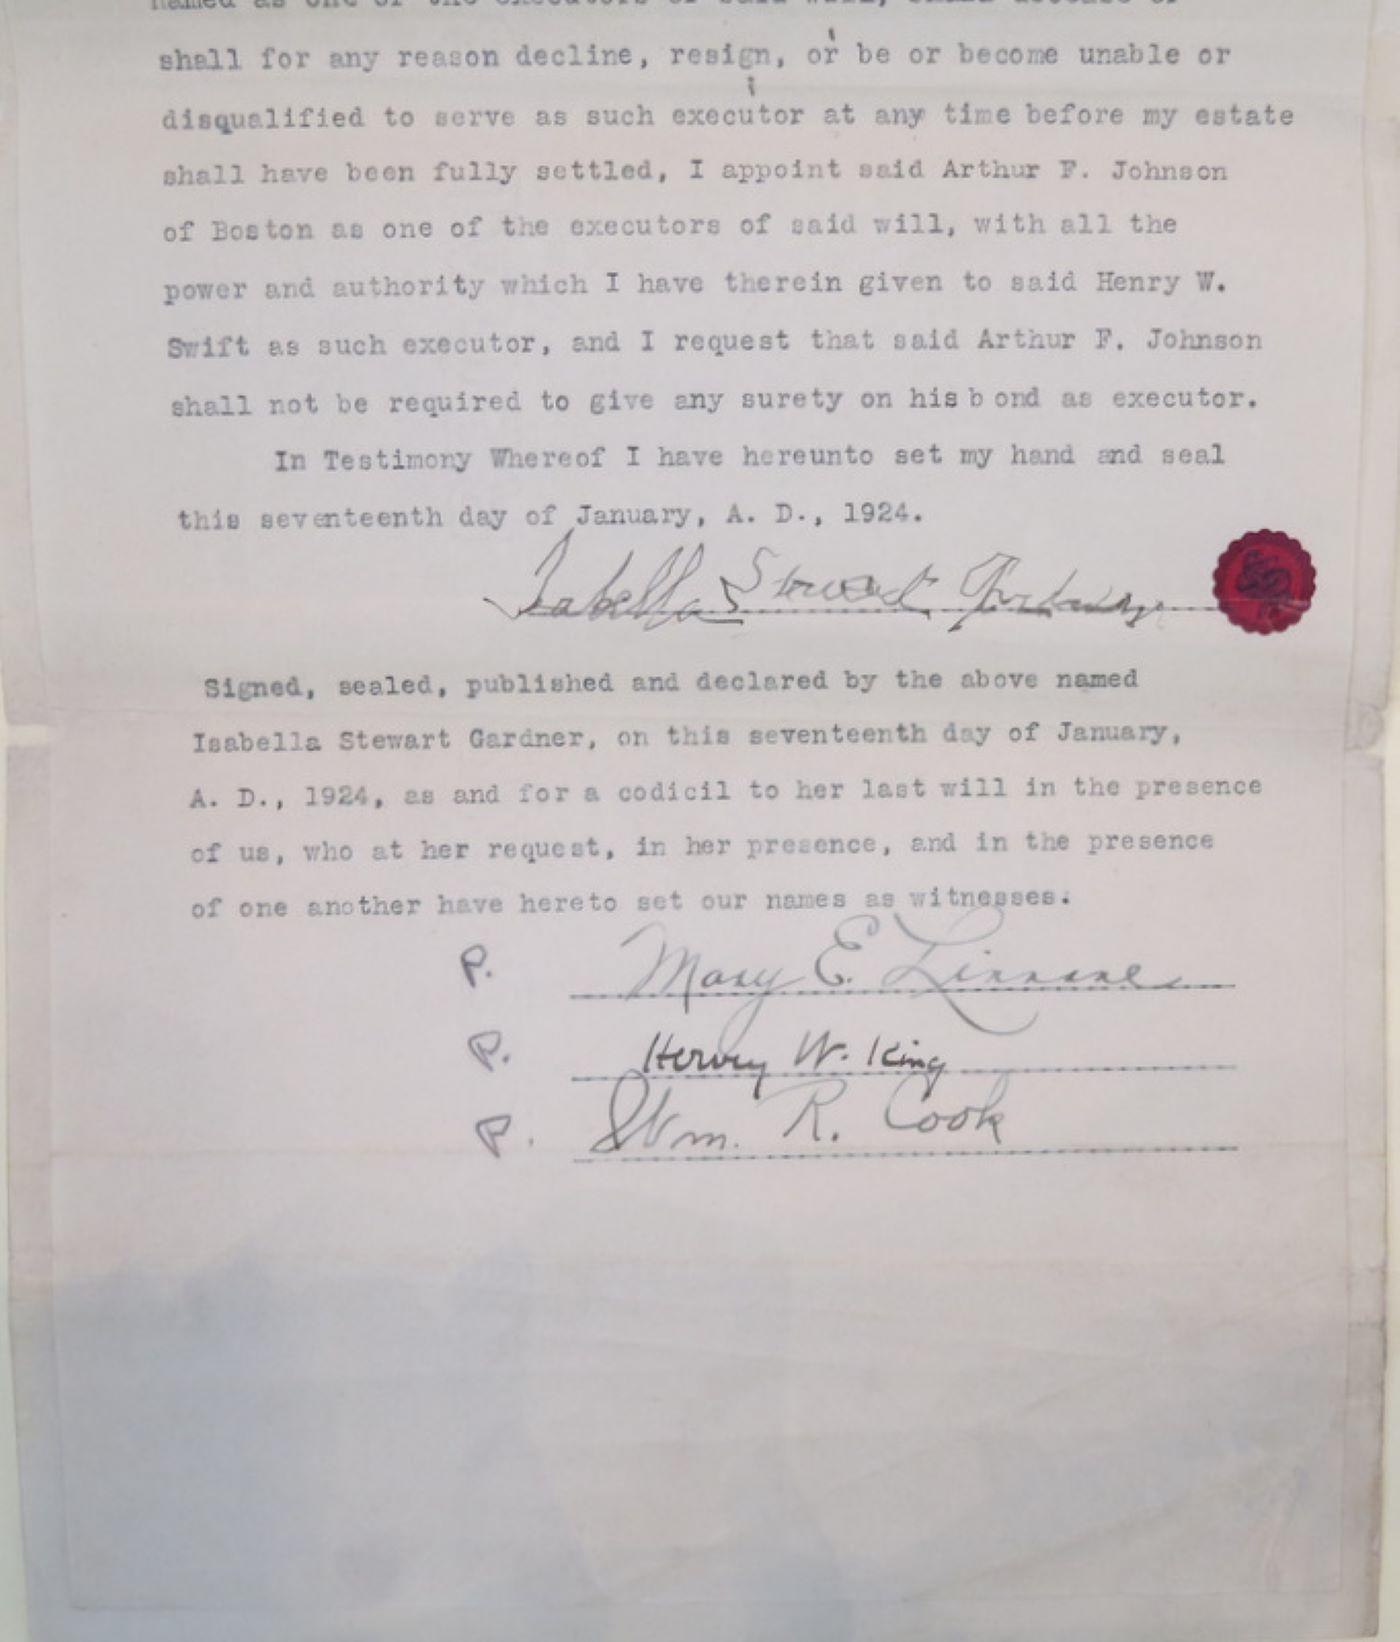 Last Will and Testament of Isabella Stewart Gardner, signature page from a 1924 amendment.